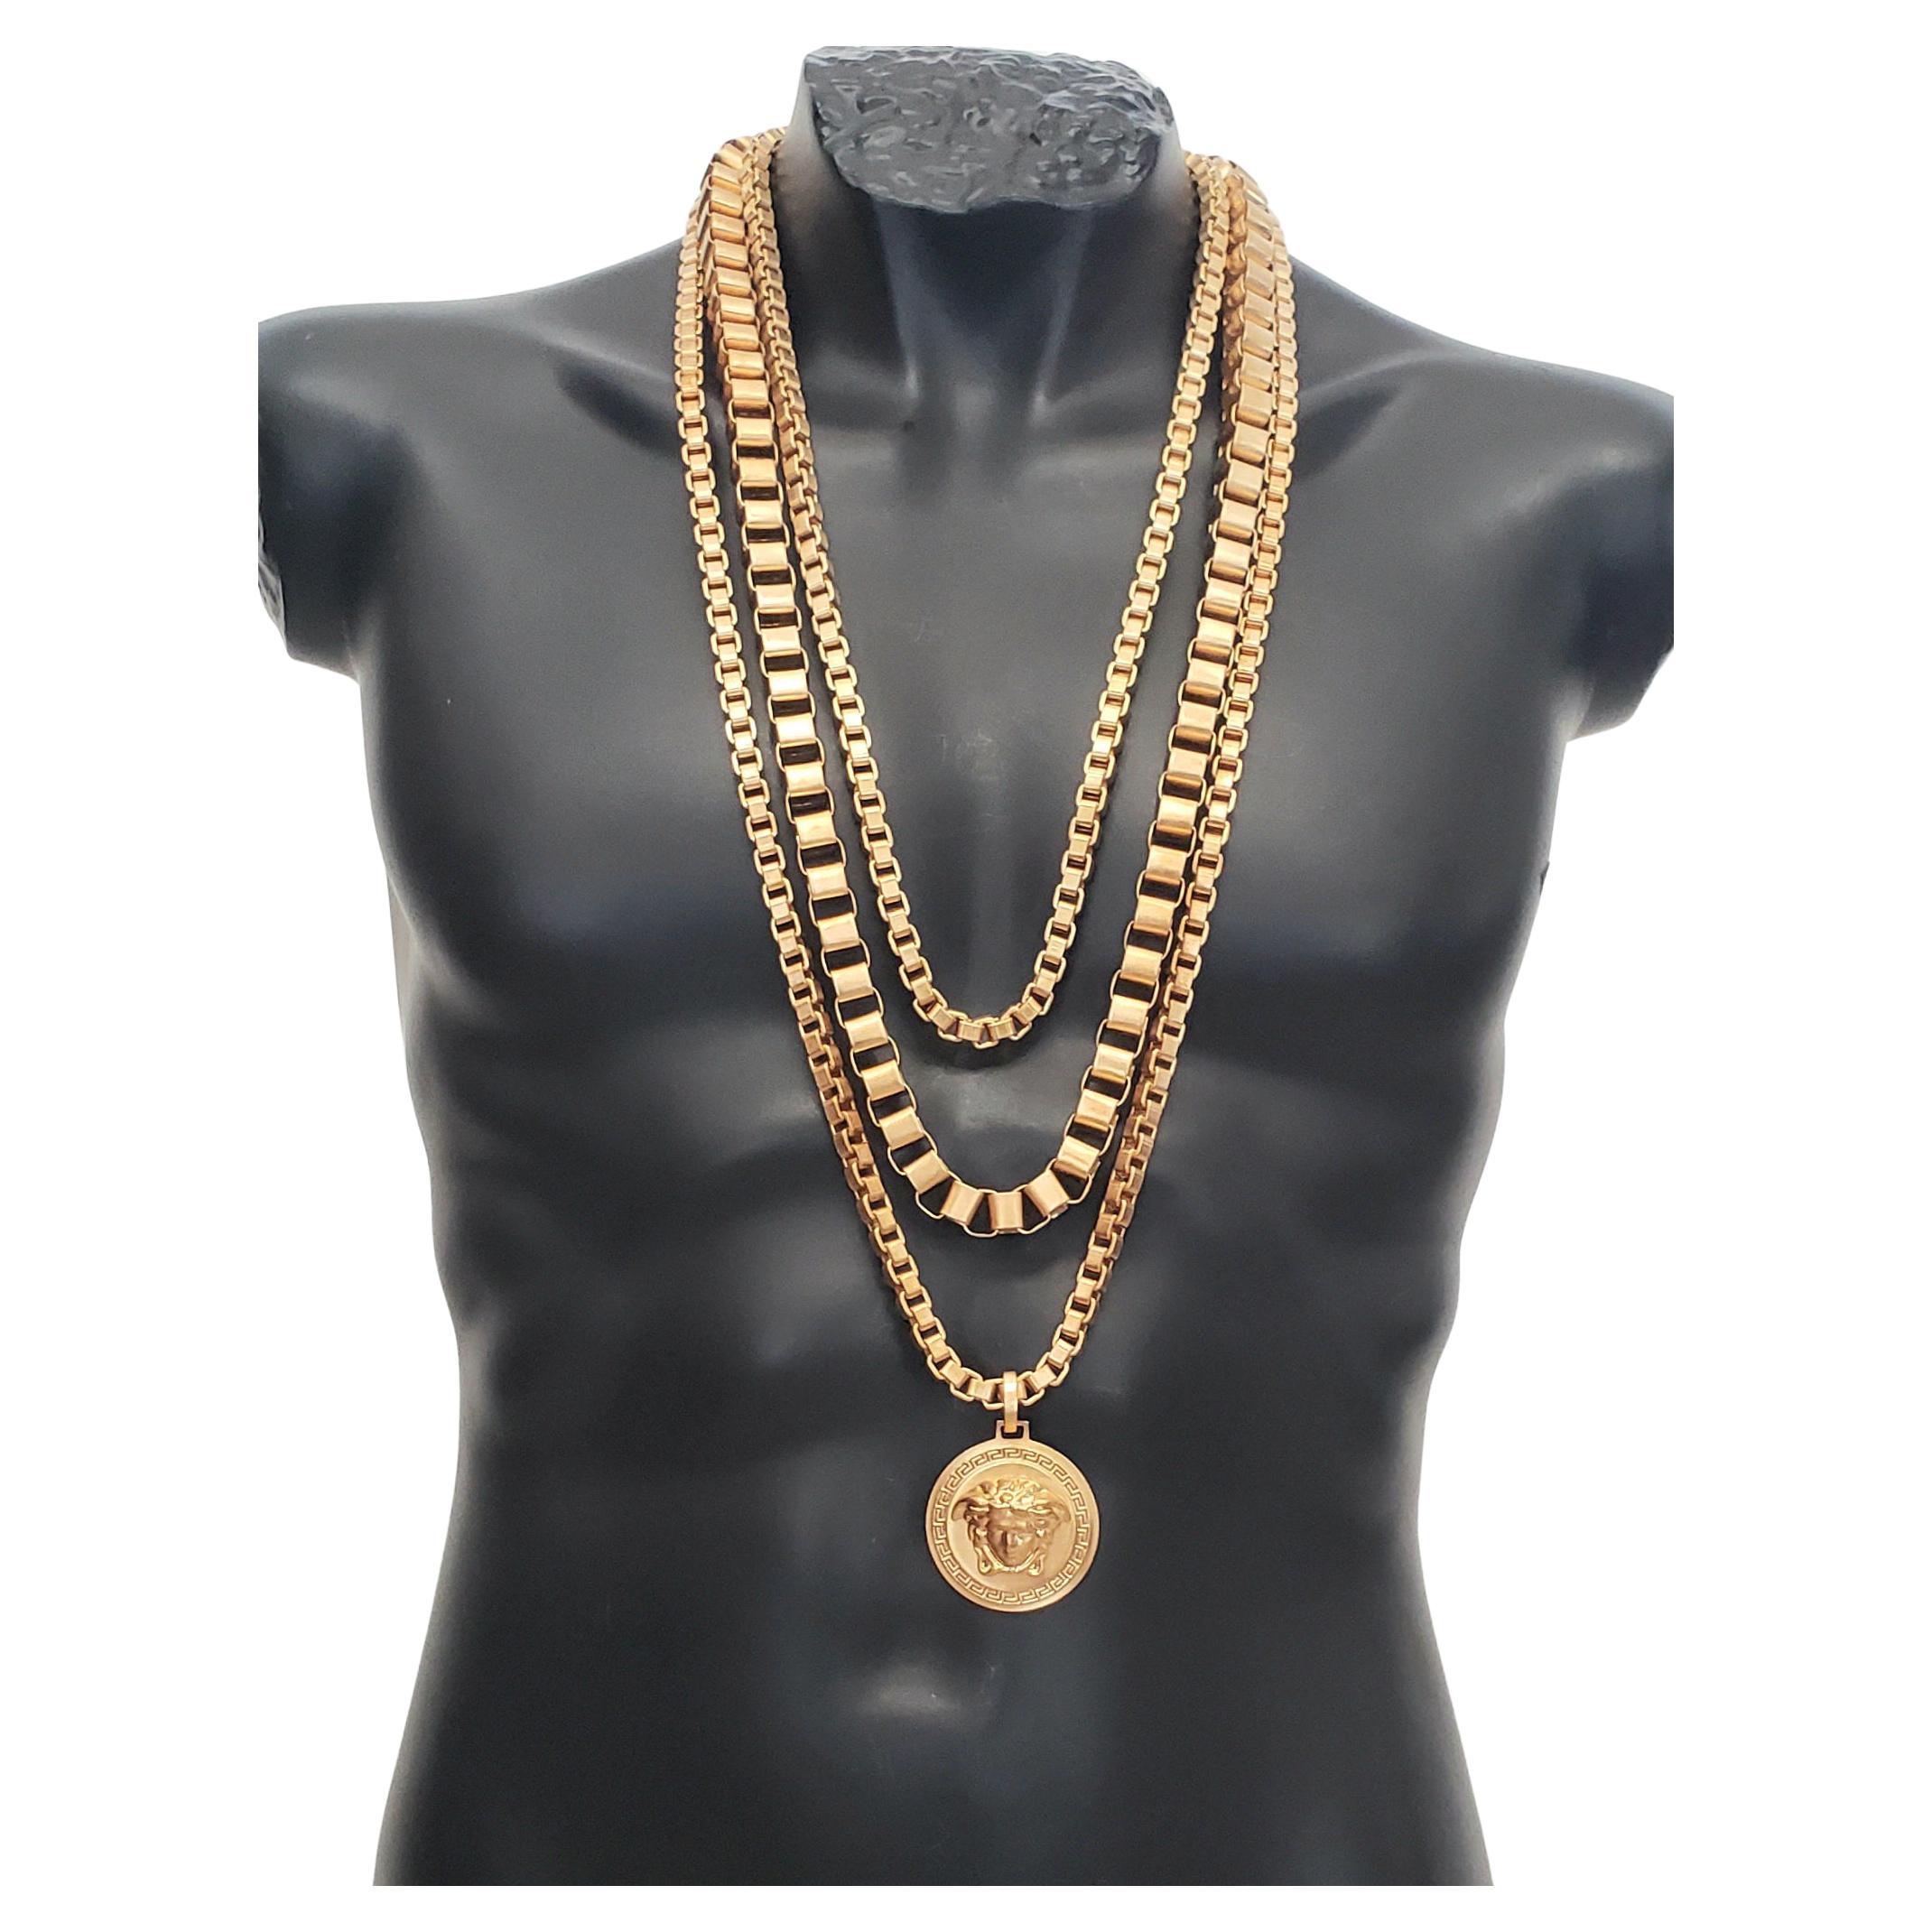 New VERSACE Triple Chain Gold-Plated Medusa Necklace as seen on Celebrities 